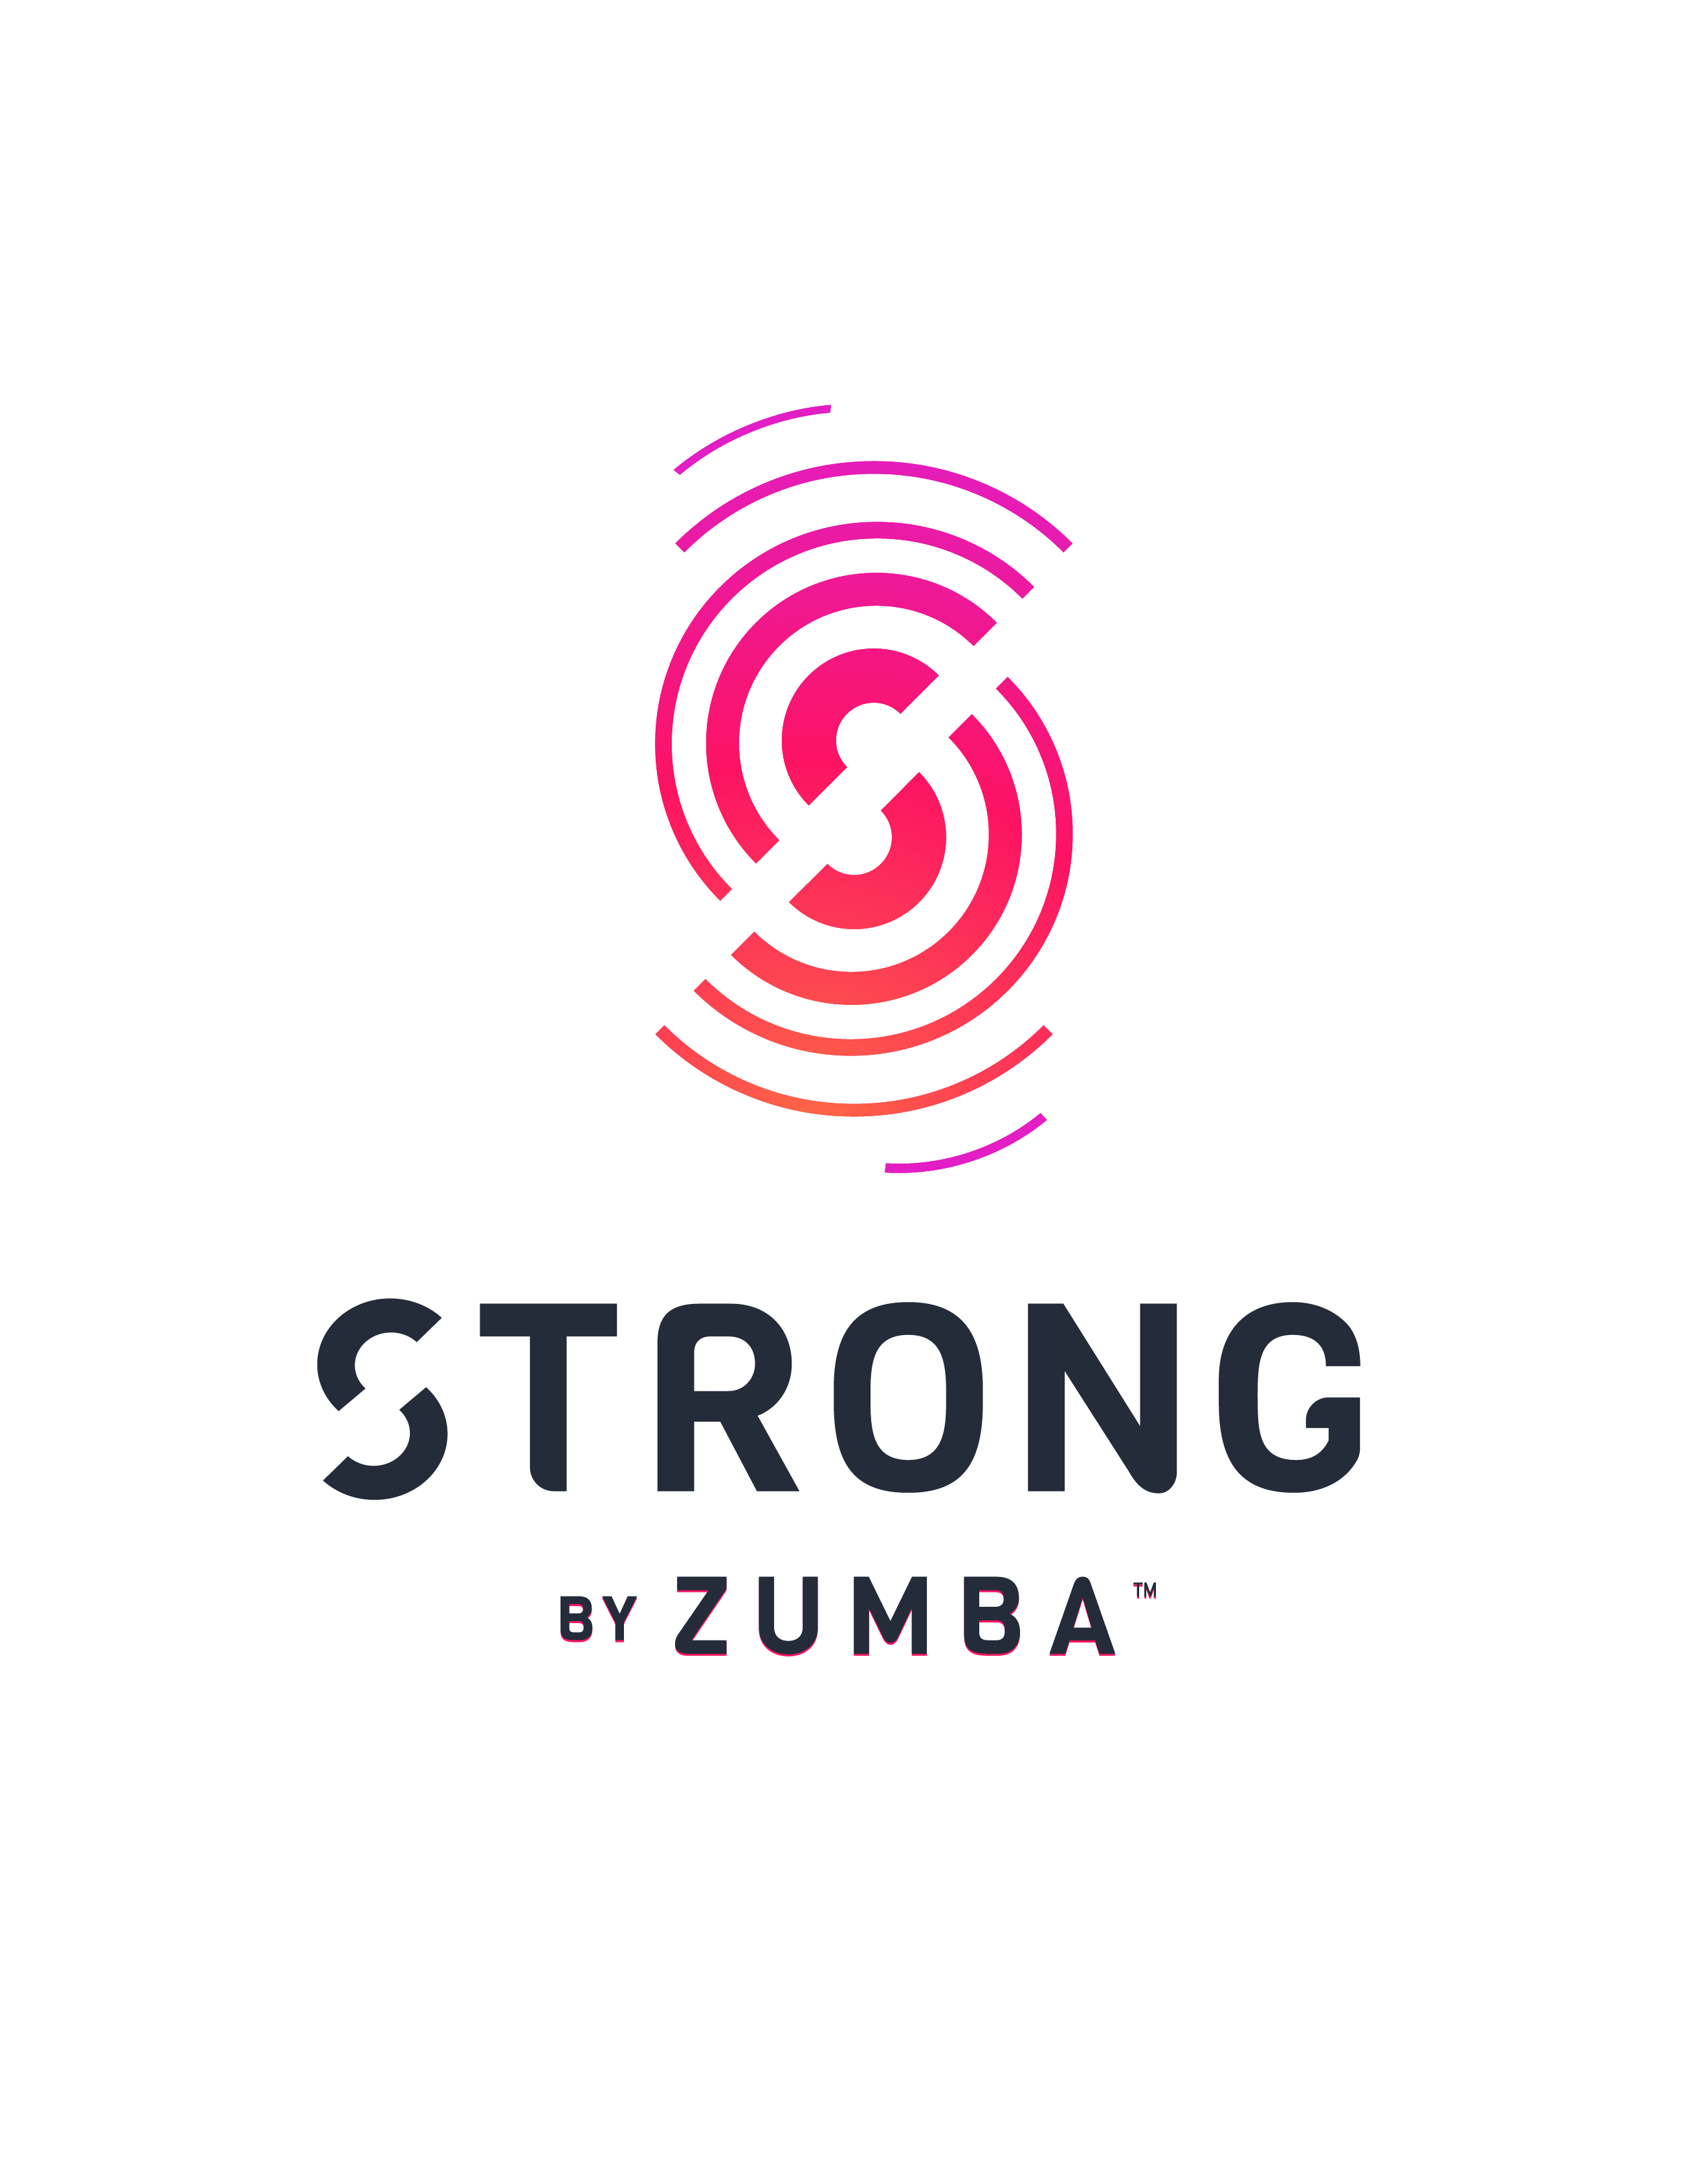 StrongNation by Zumba